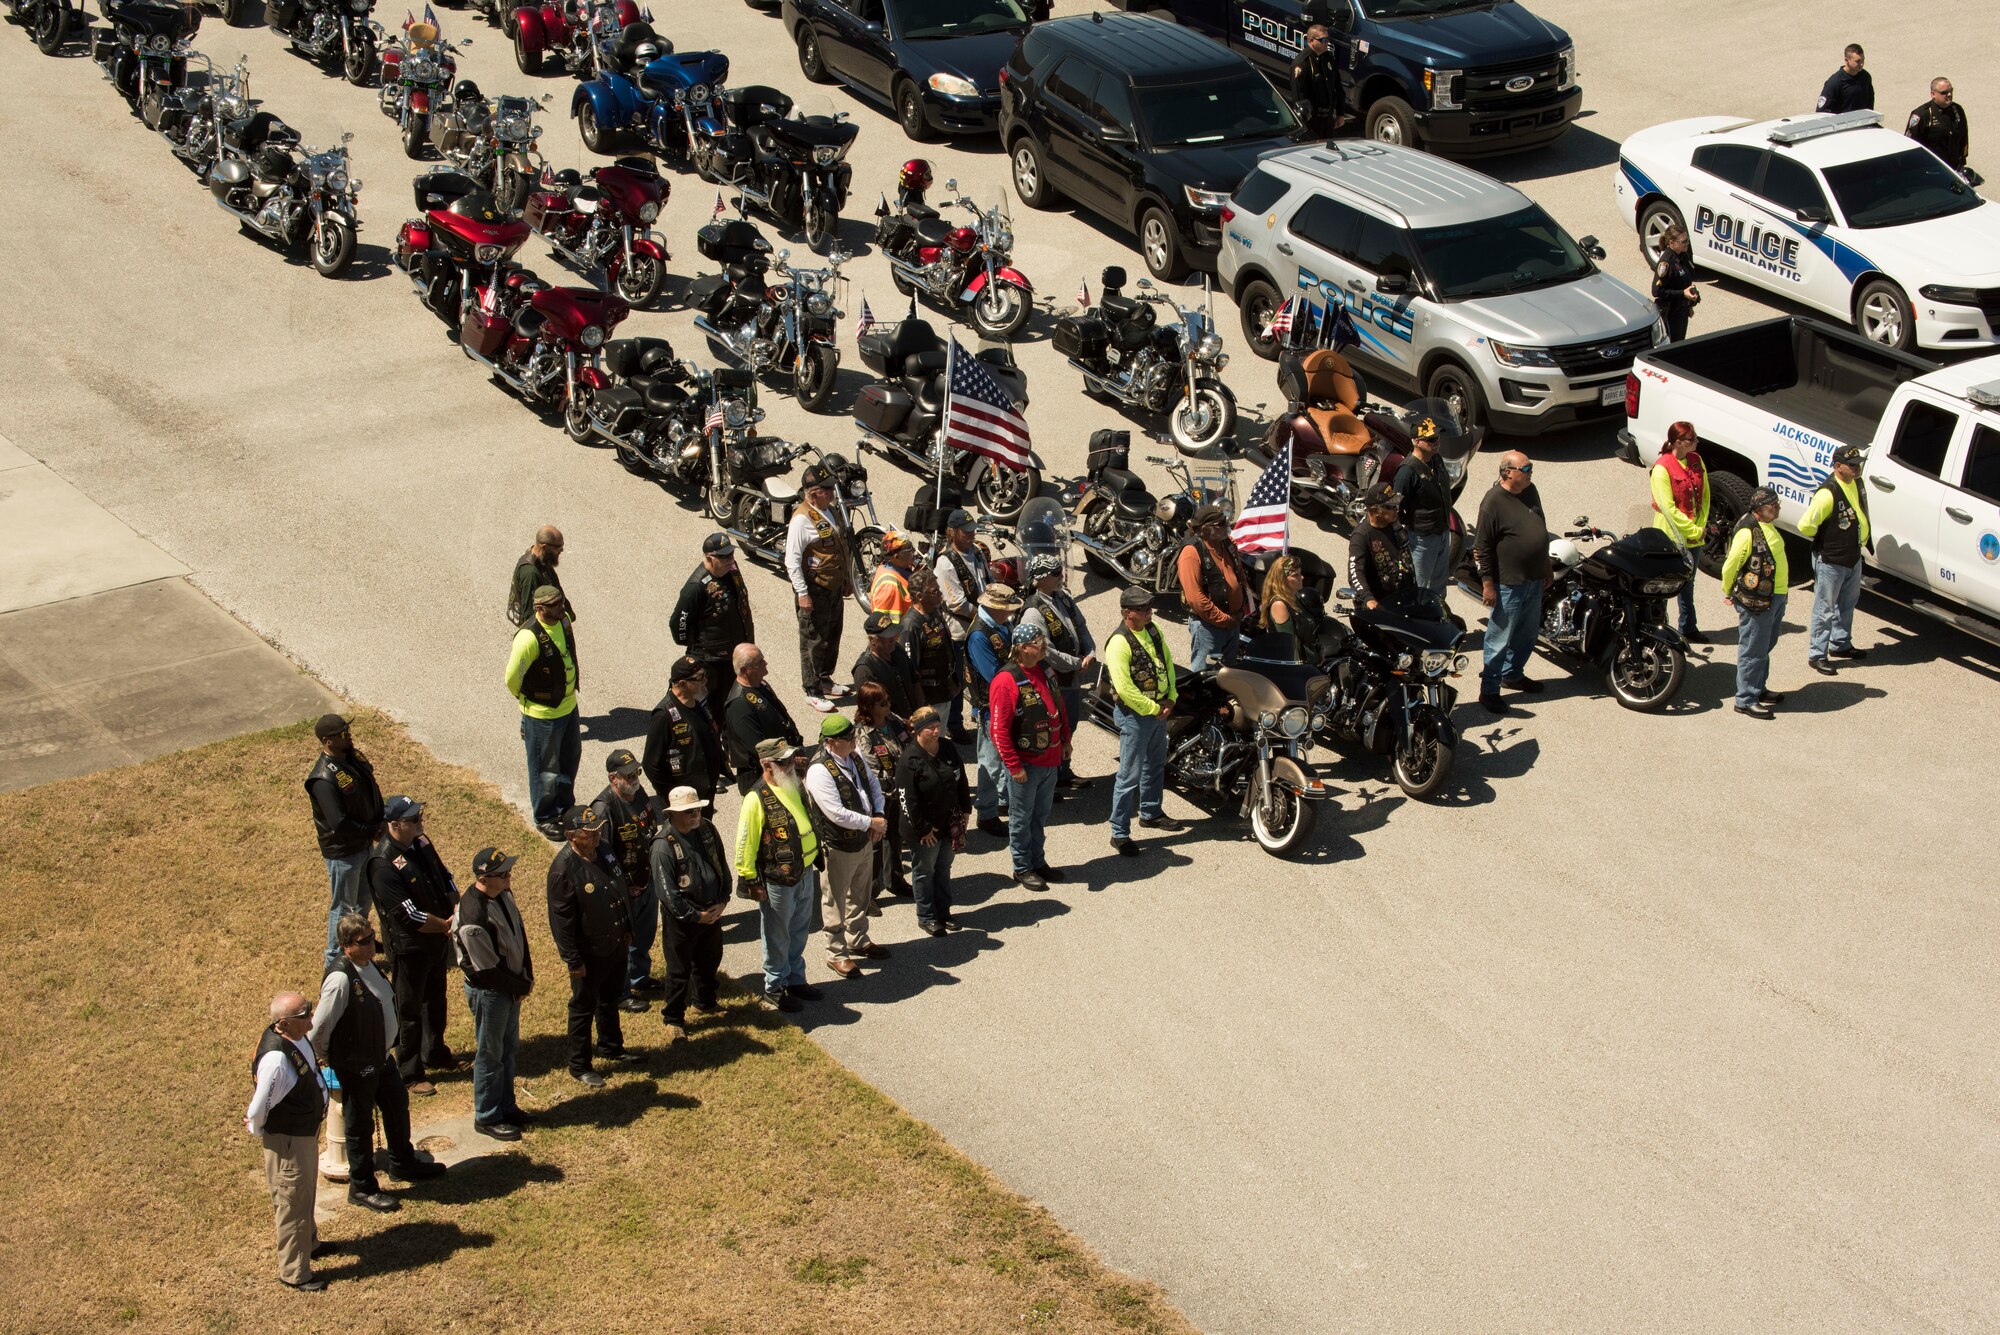 Master Sgt. William Posch arrived home to Patrick Air Force Base April 3, 2018 at noon after being killed in action in Iraq last month where he was greeted by many community members. The Patriot Guard Riders were among those who showed their support and escorted the motorcade for Posch's dignified transfer. The entire base lined the streets of Patrick Air Force Base to pay respect to MSgt. Posch and his family for their ultimate sacrifice. (U.S. Air Force photo)